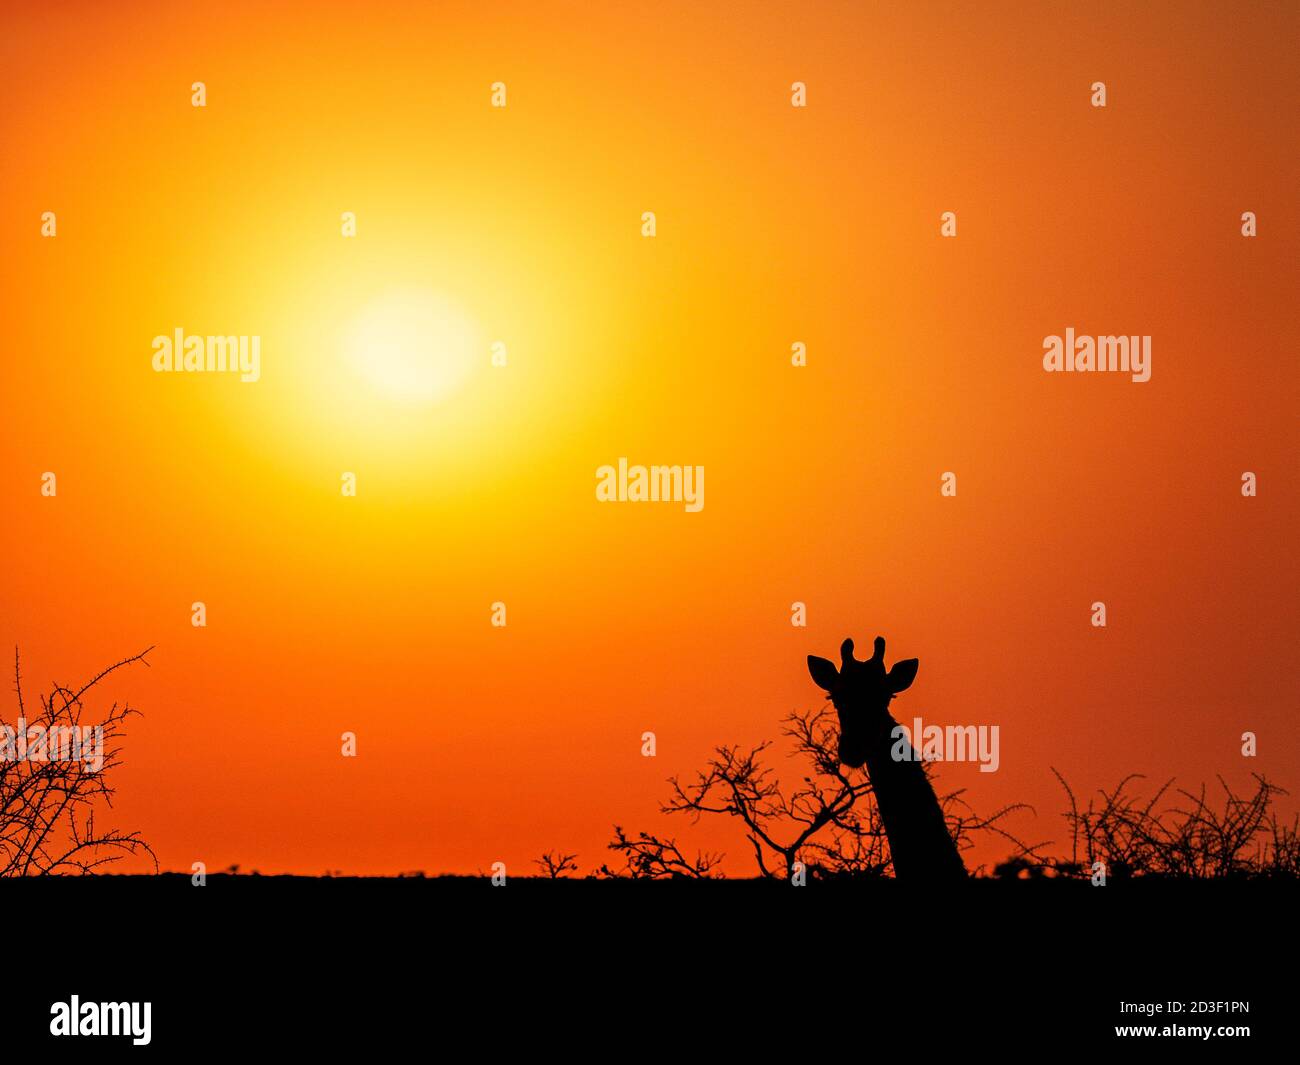 Orange sunset in South Africa landscape with silhouette of giraffe looking towards camera and some branches Stock Photo